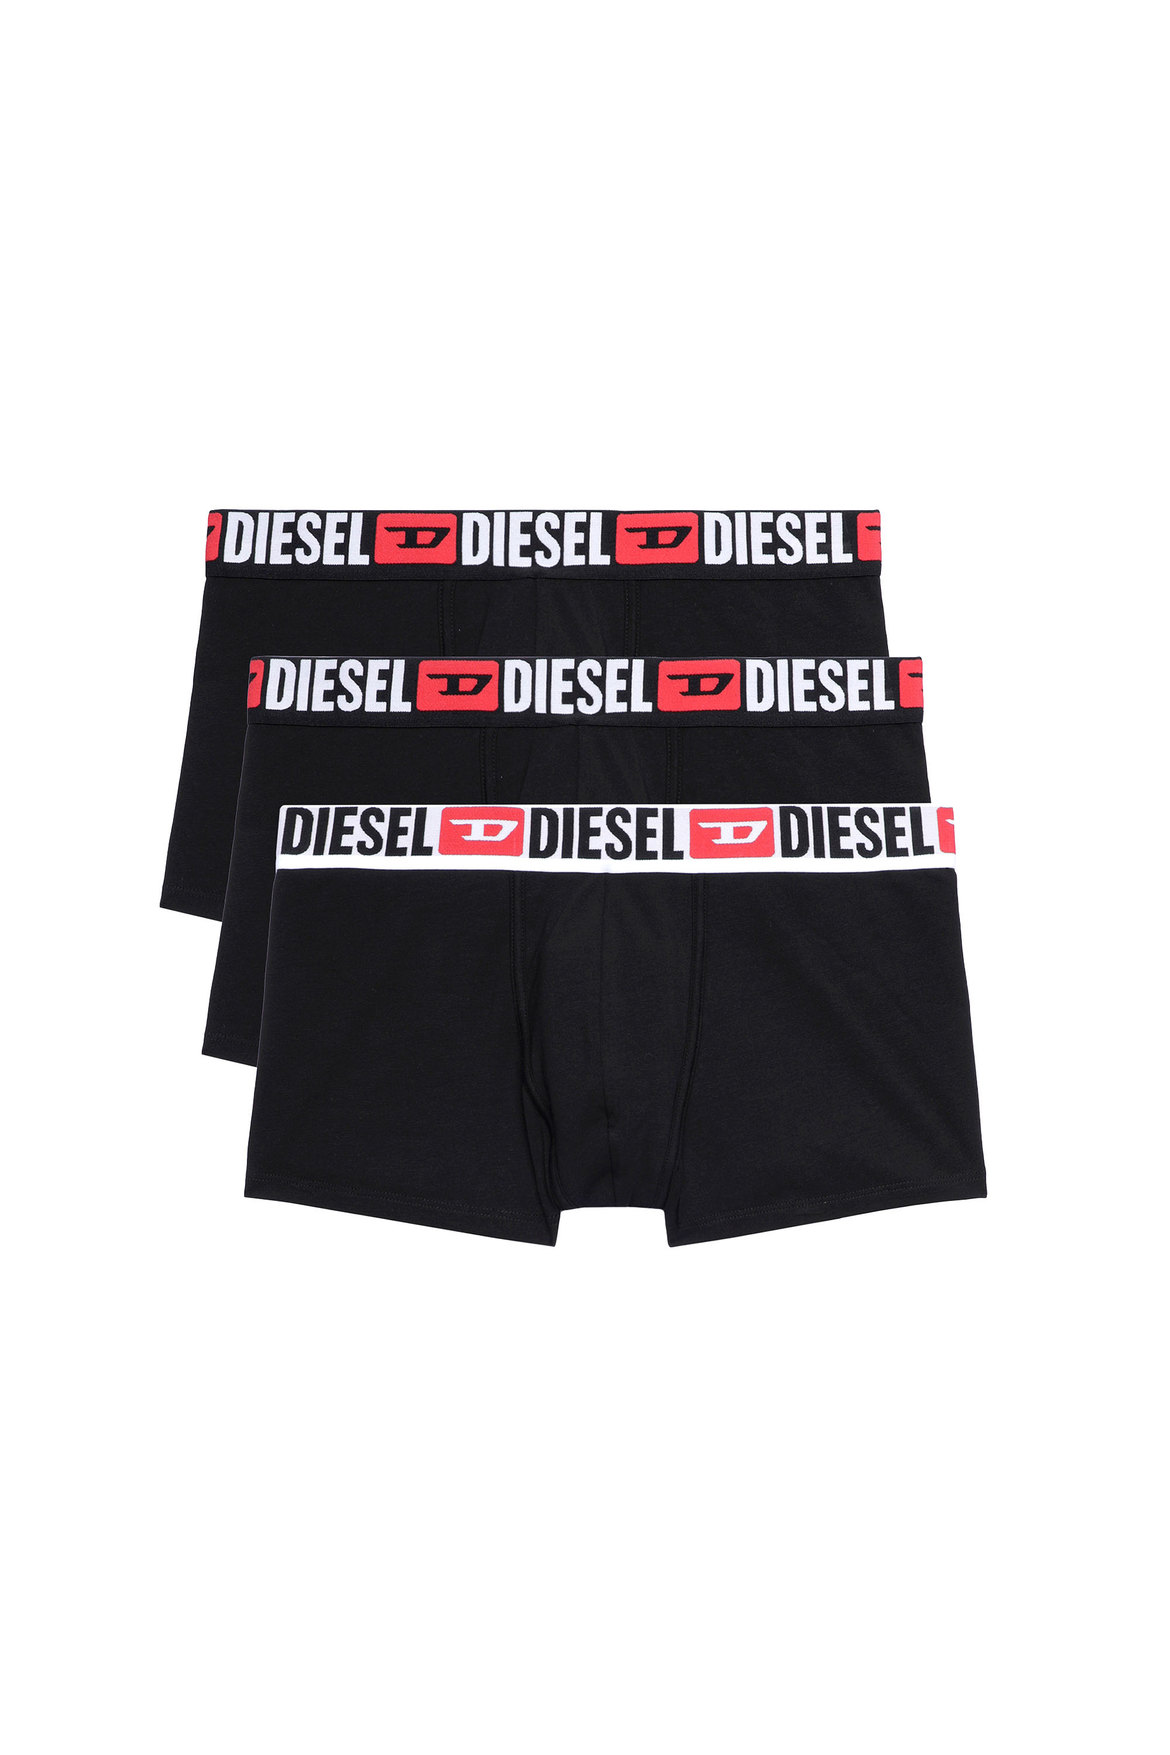 Tall-Over Logo Waist Boxers - 3 Pack | Diesel